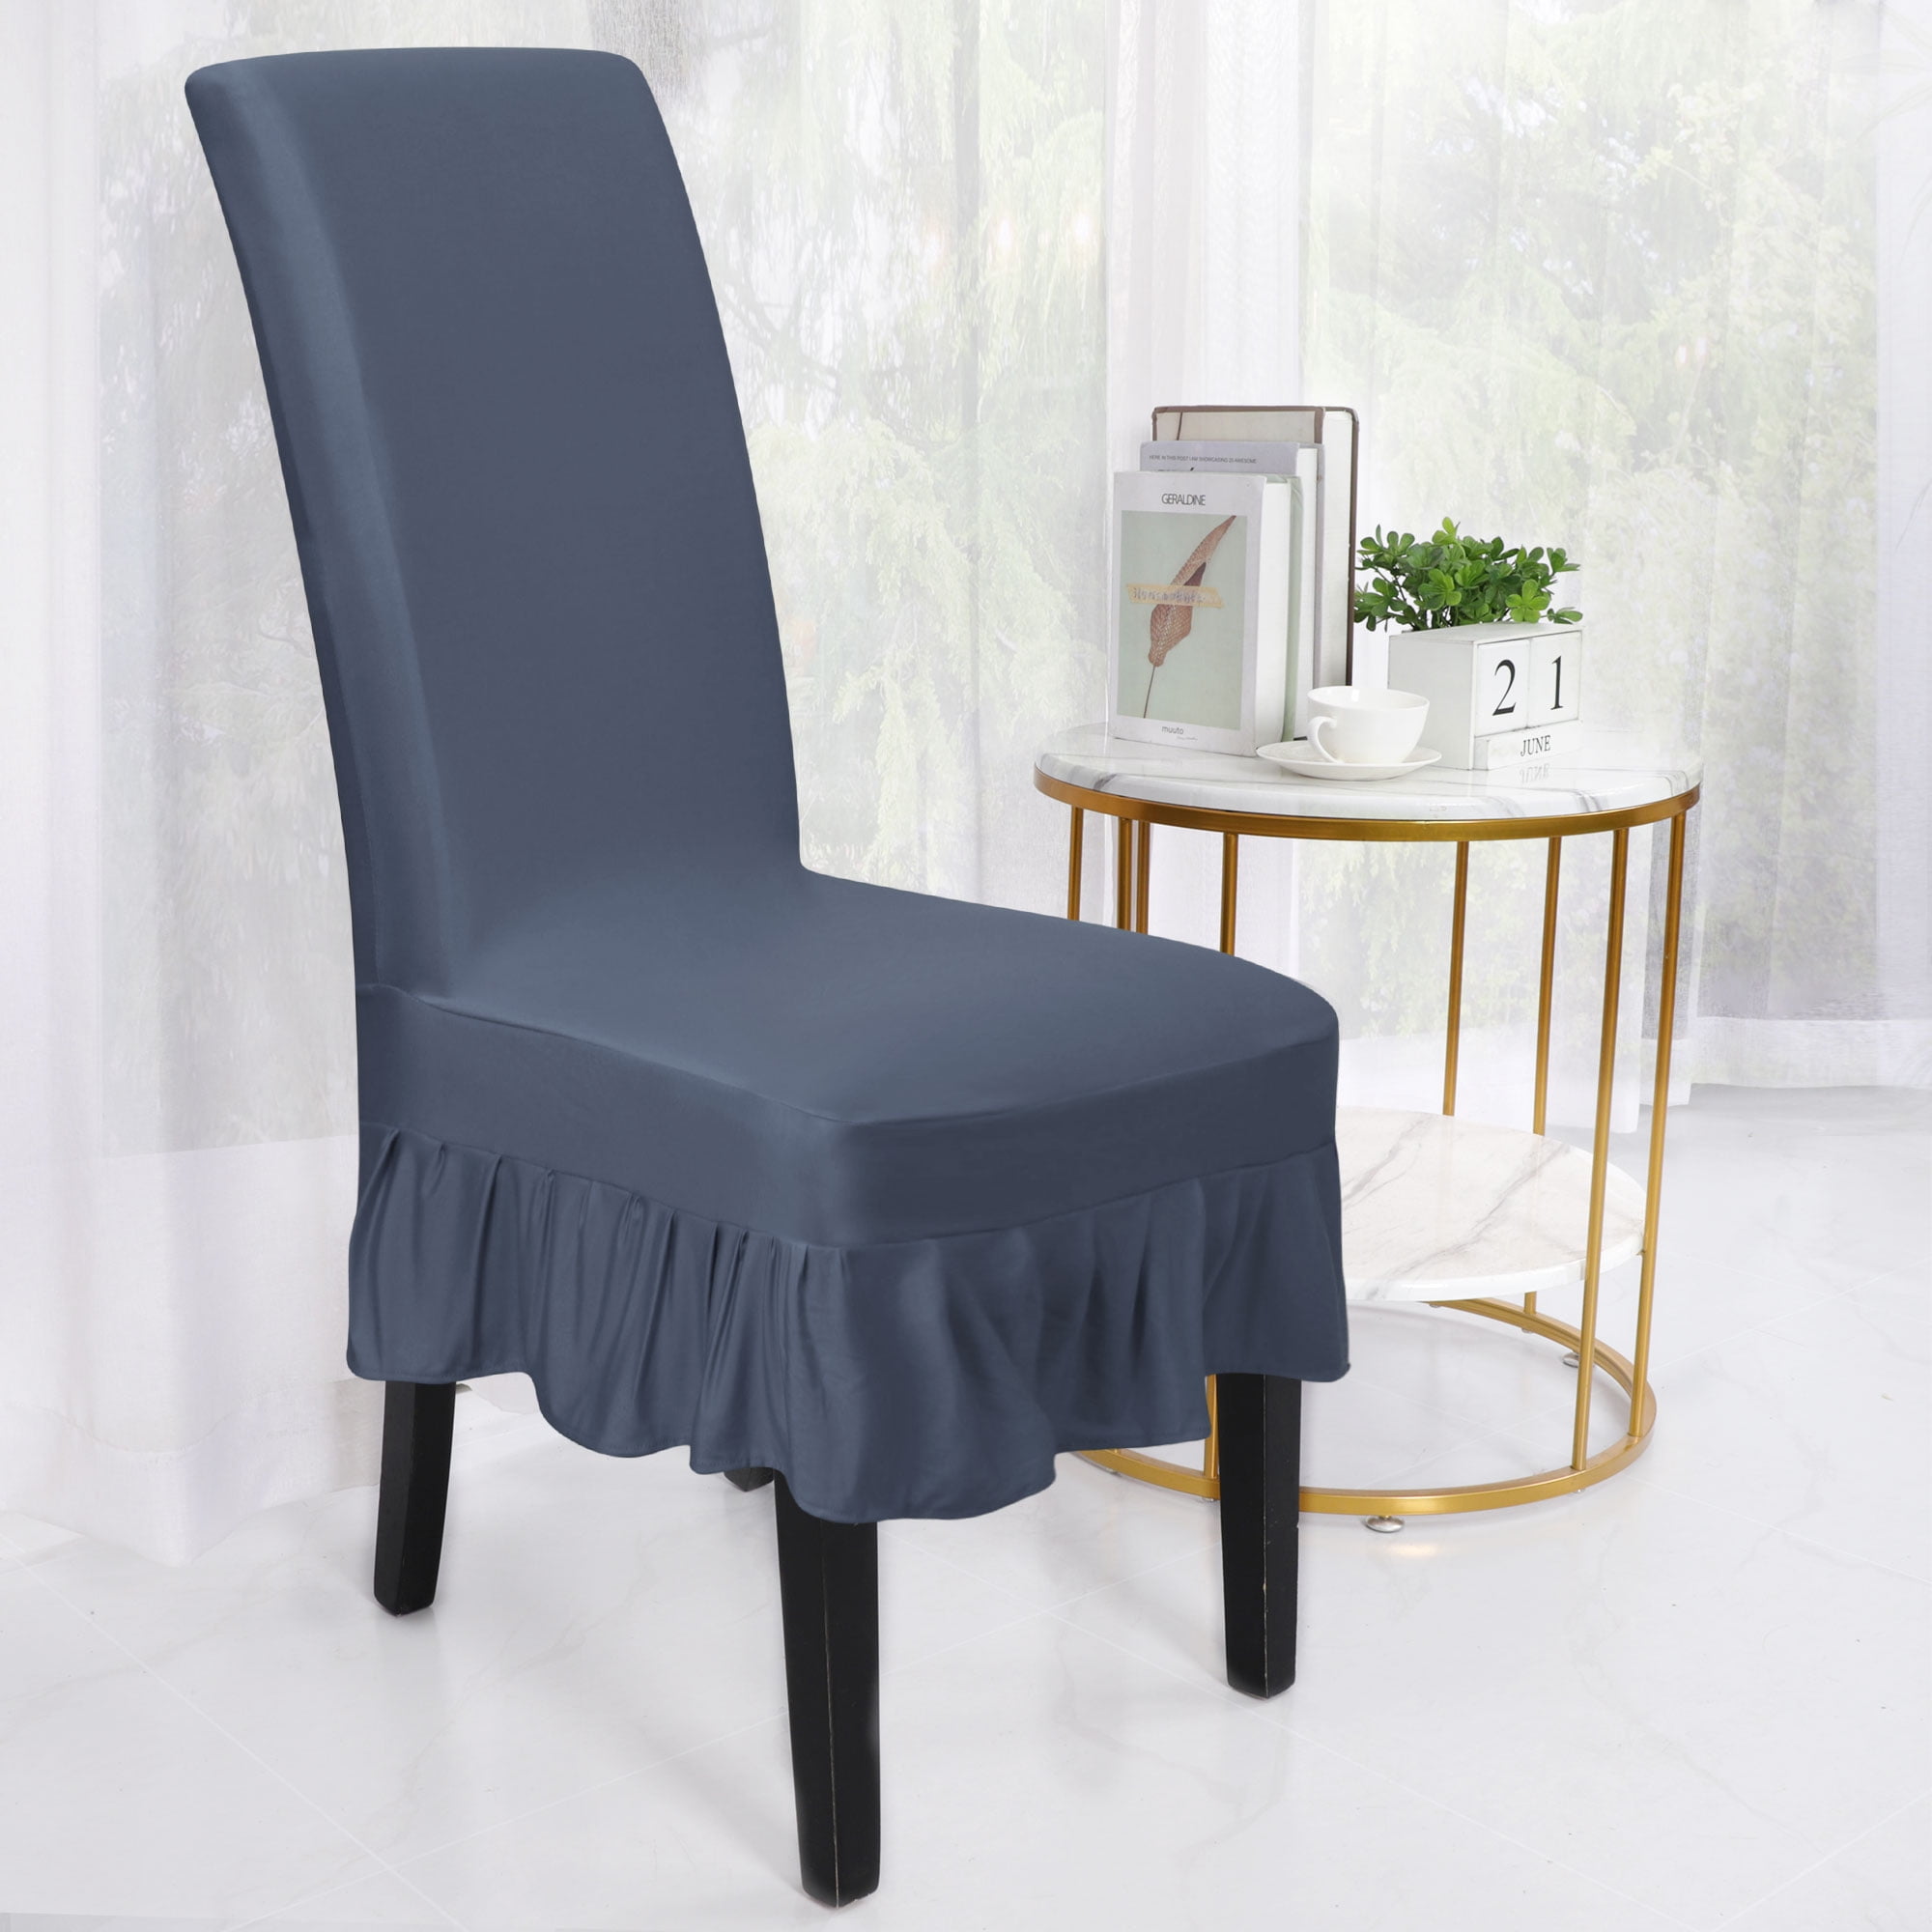 Details about   1PCS Dining Chair Cover Stretch Slipcovers Universal Removable Chair Protect US 